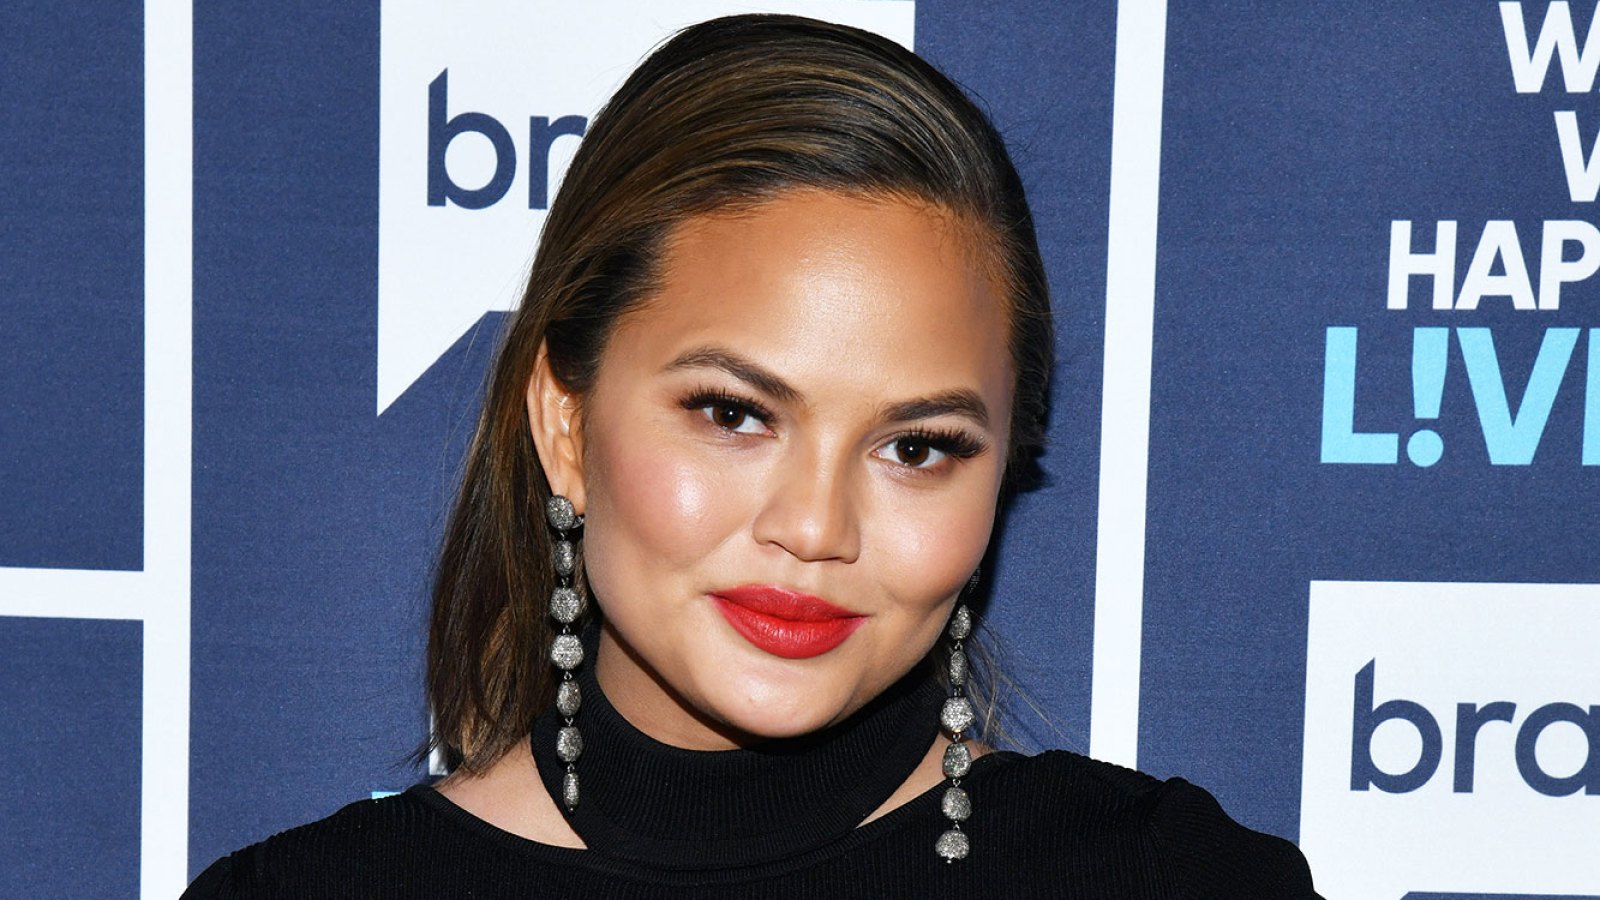 Chrissy Teigen Shows Off Her ‘Thigh Hives’ and ‘Fun’ Stretch Marks